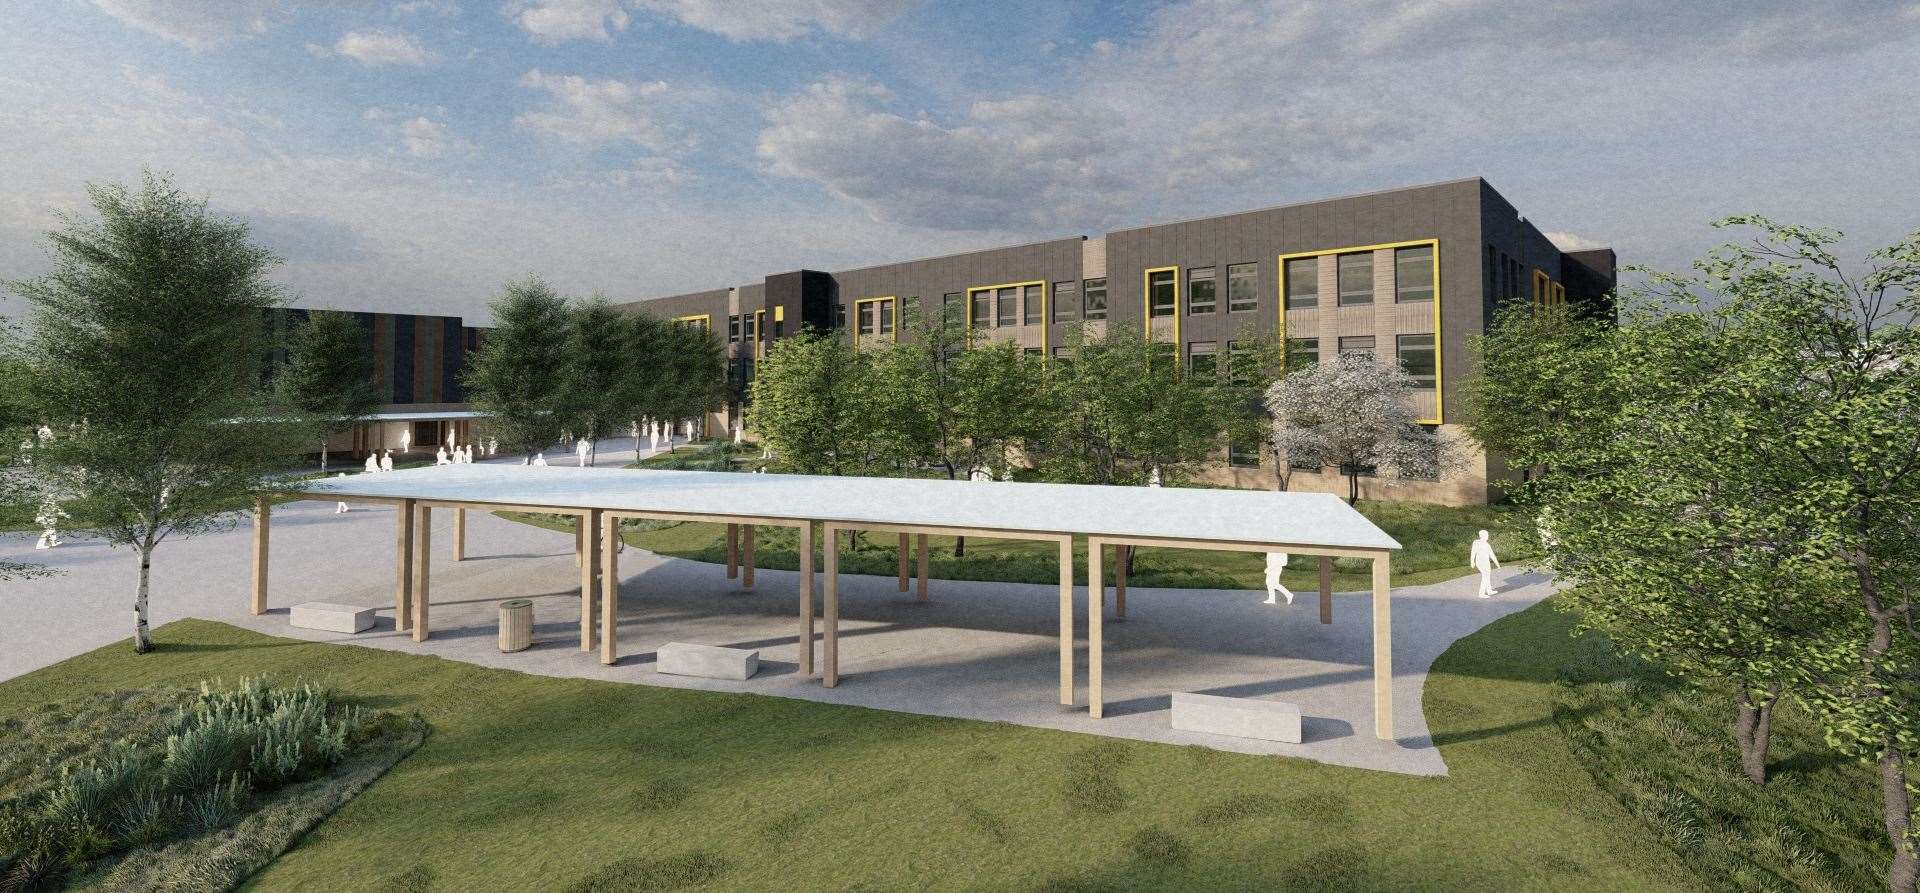 An artist’s impression of the new school buildings